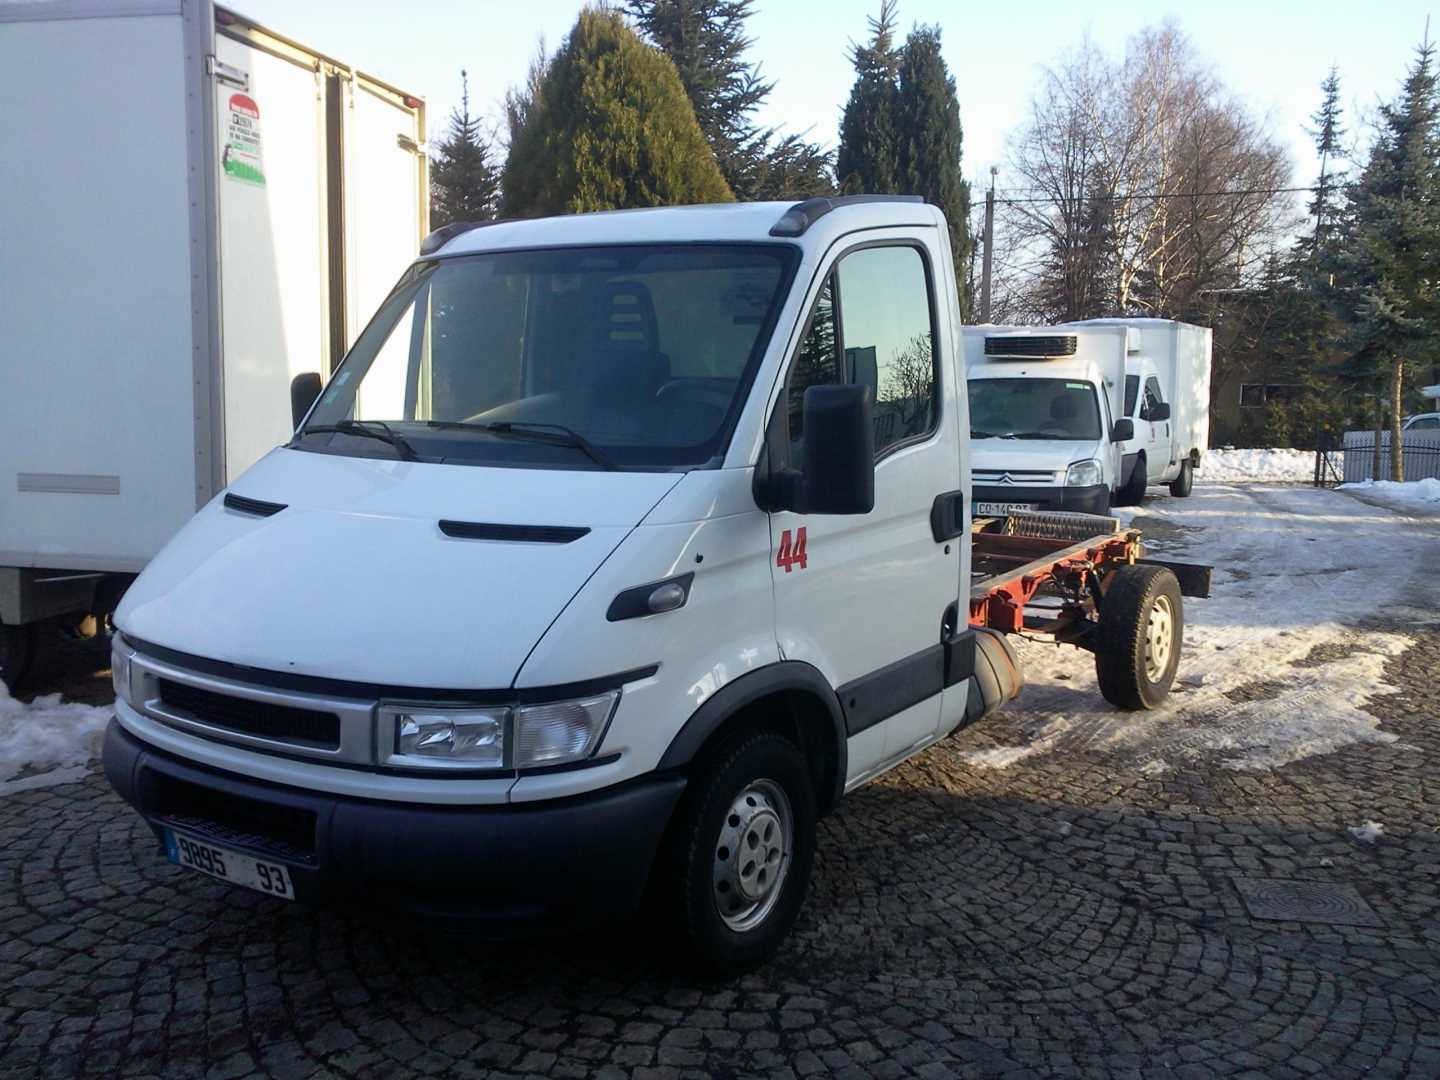 Iveco Turbo Daily 2005 2.3